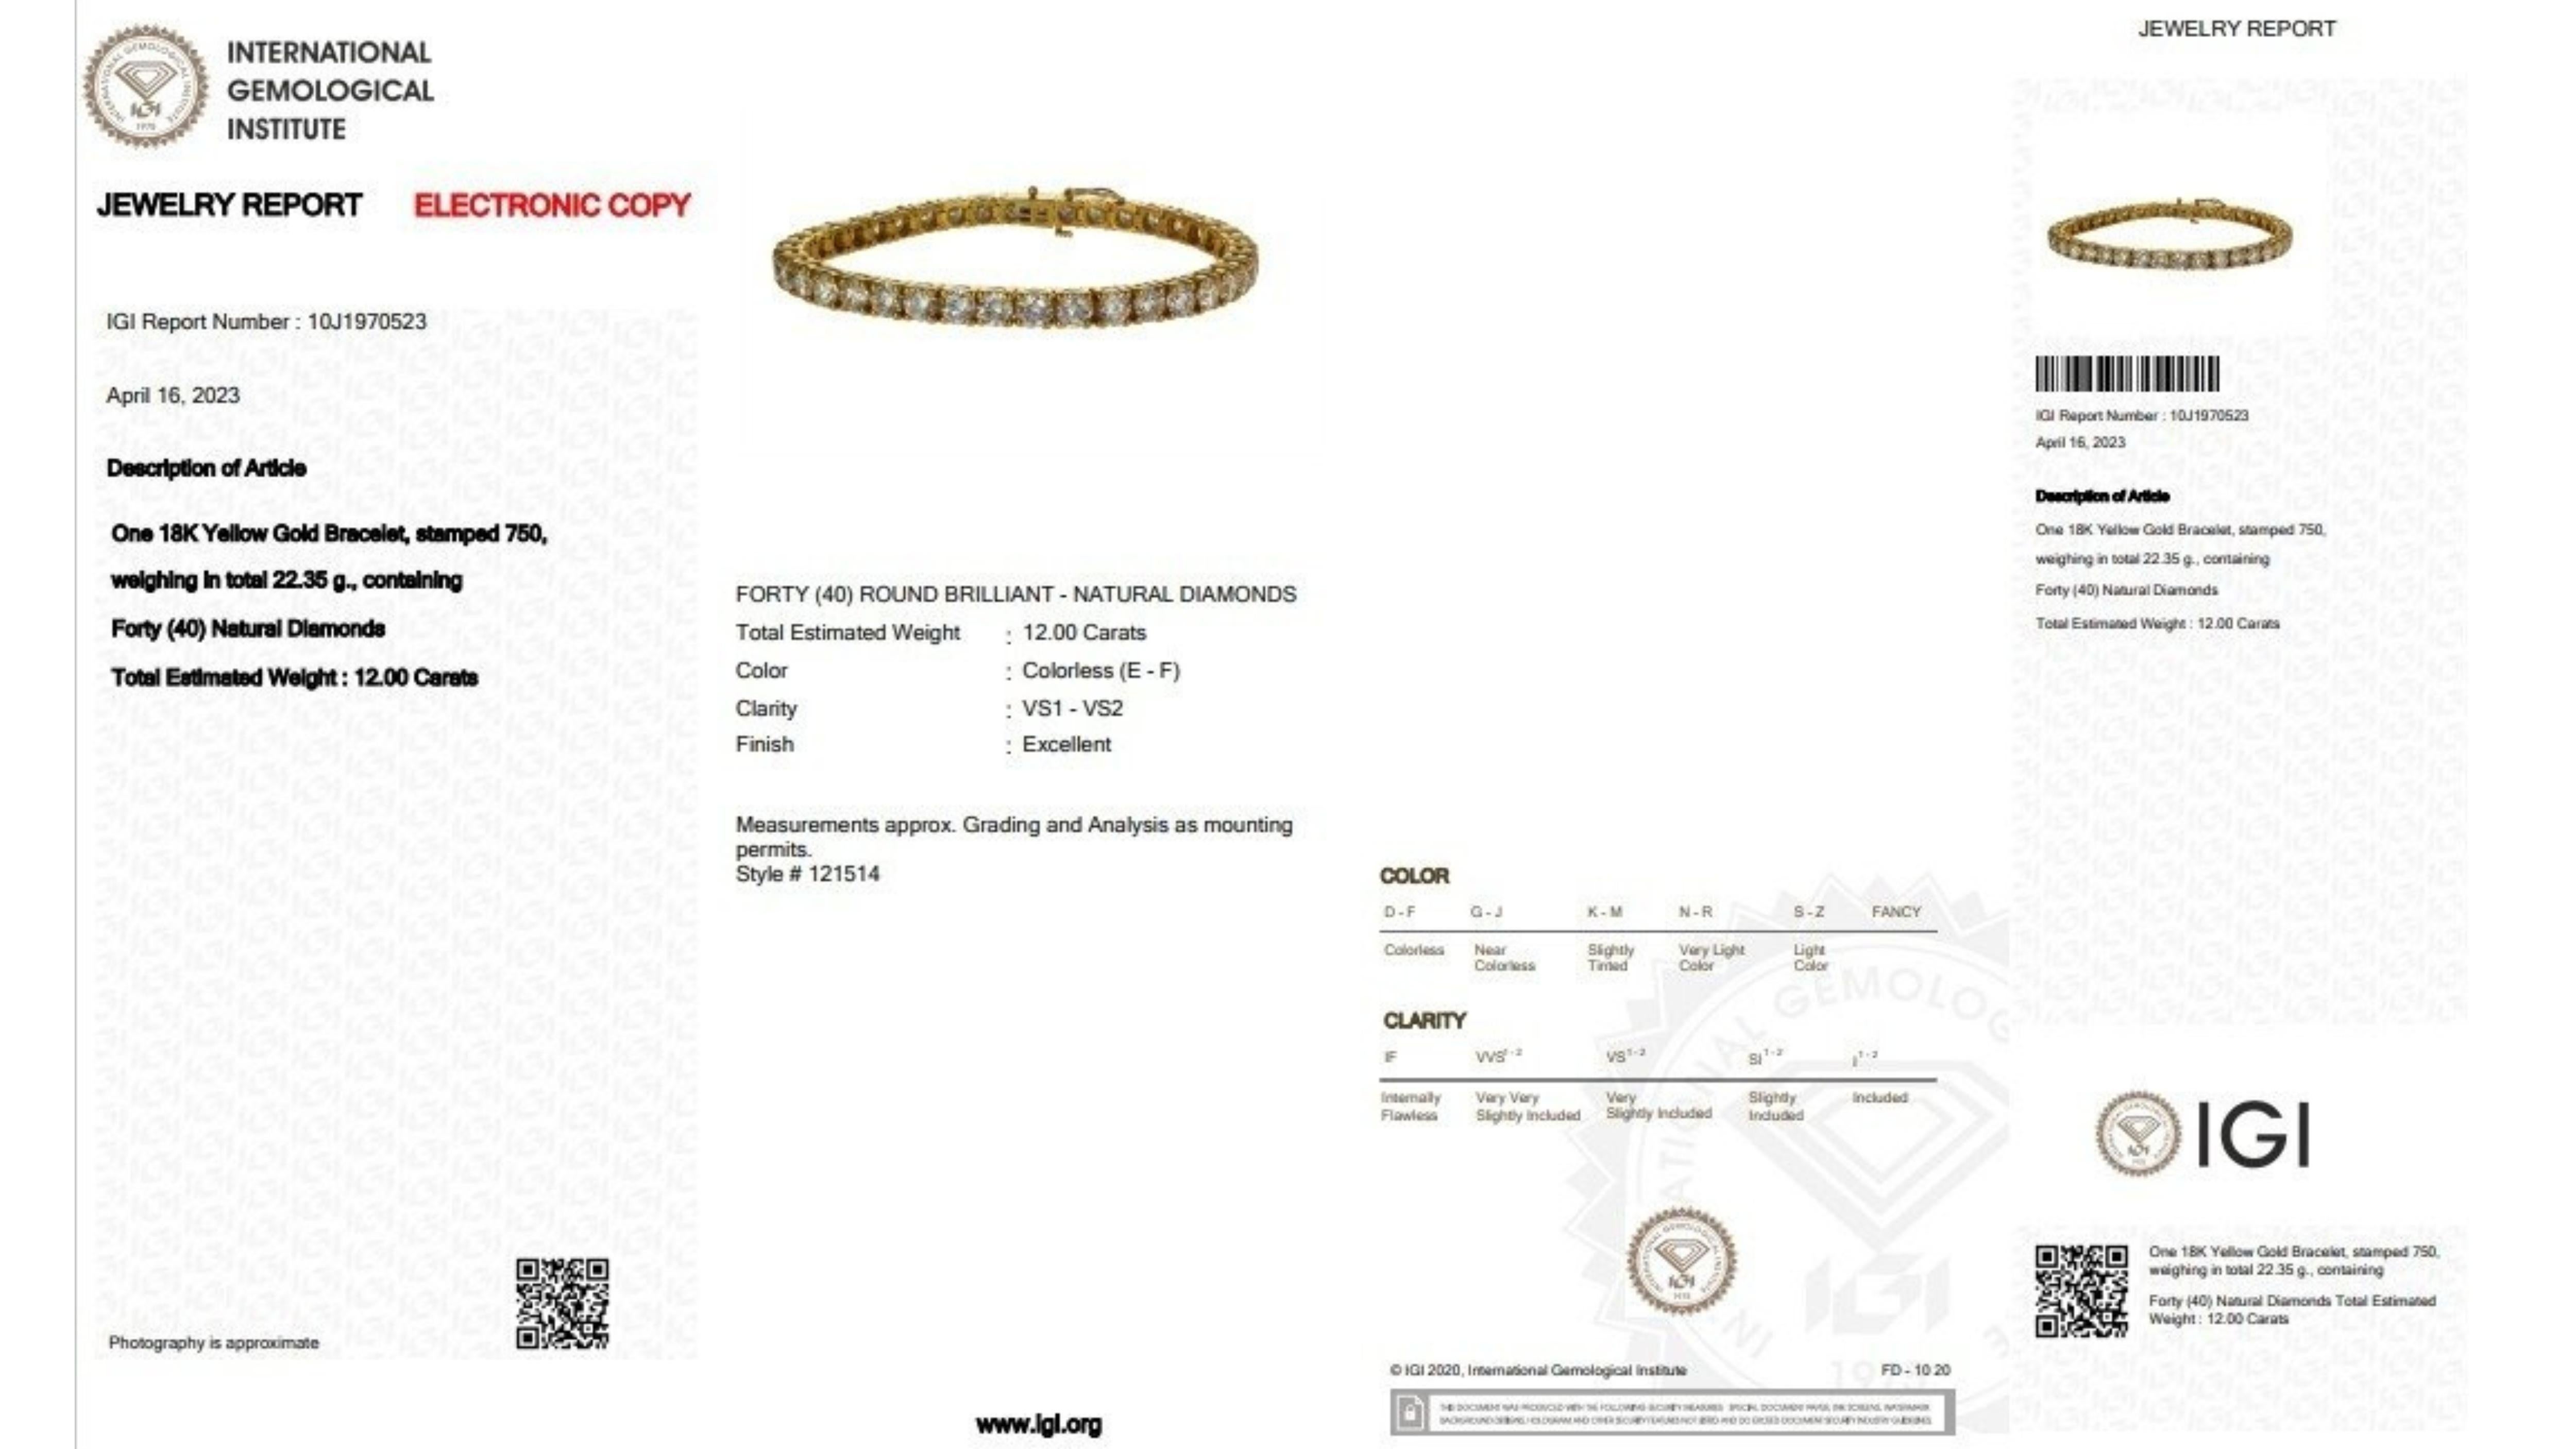 A luxurious gold tennis bracelet with ideal cut round brilliant diamonds in 12-carat round brilliant diamonds. The jewelry is made of 18k Yellow Gold with a high-quality polish. It comes with an IGI certificate and a fancy jewelry box.

40 diamonds